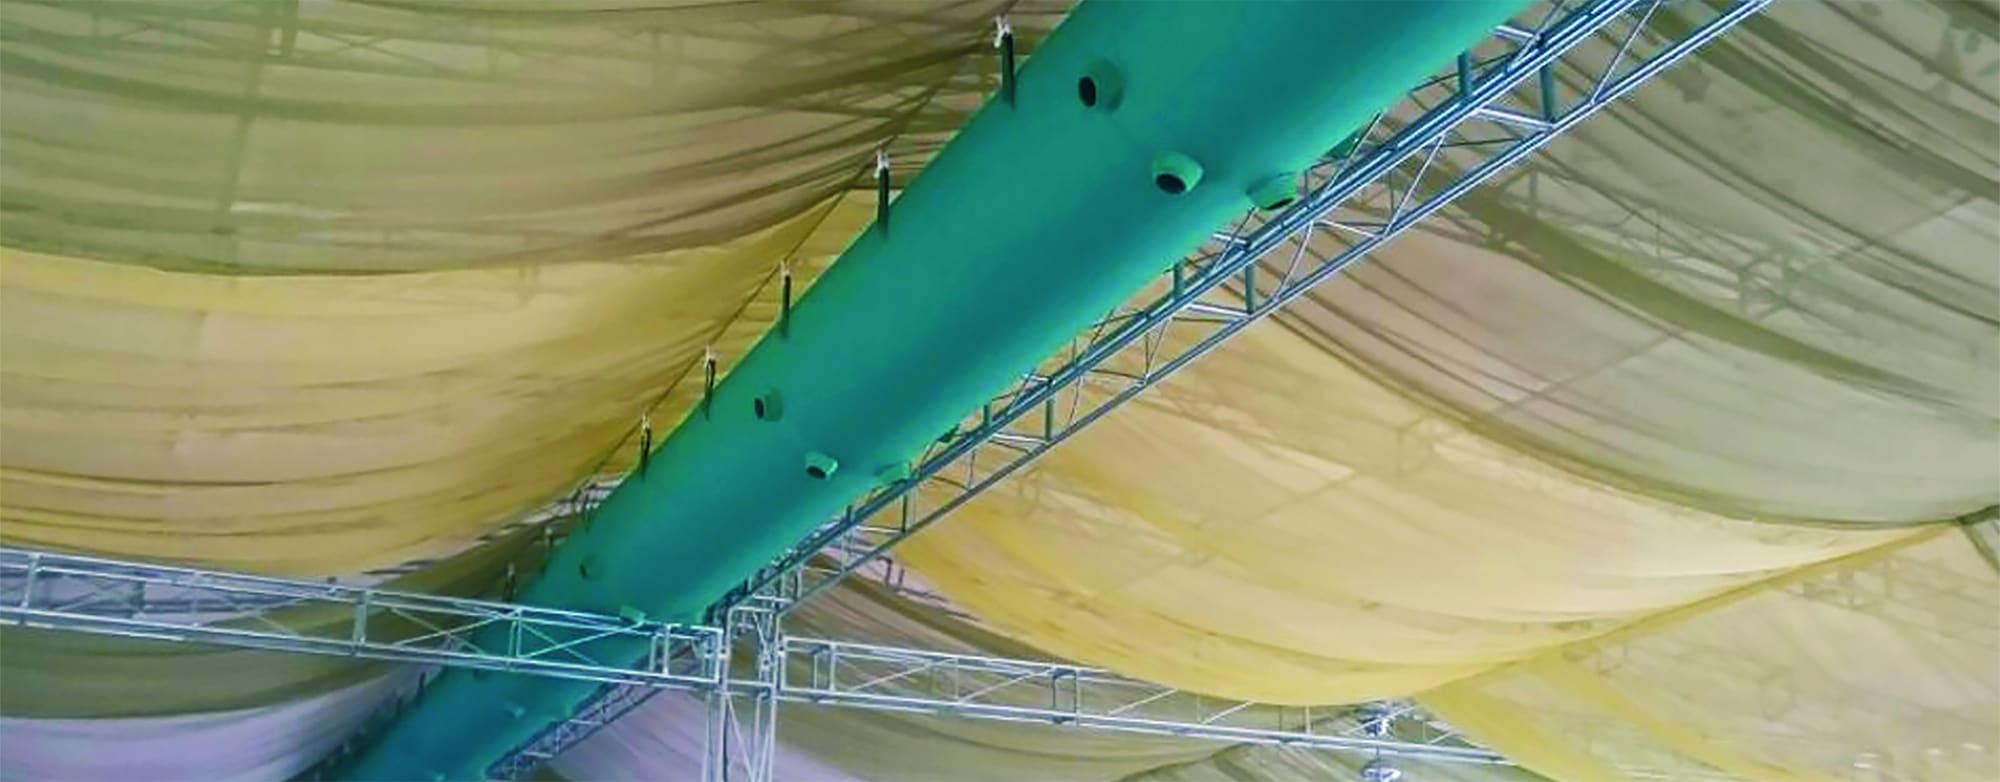 Marquee ventilation with a green fabric duct